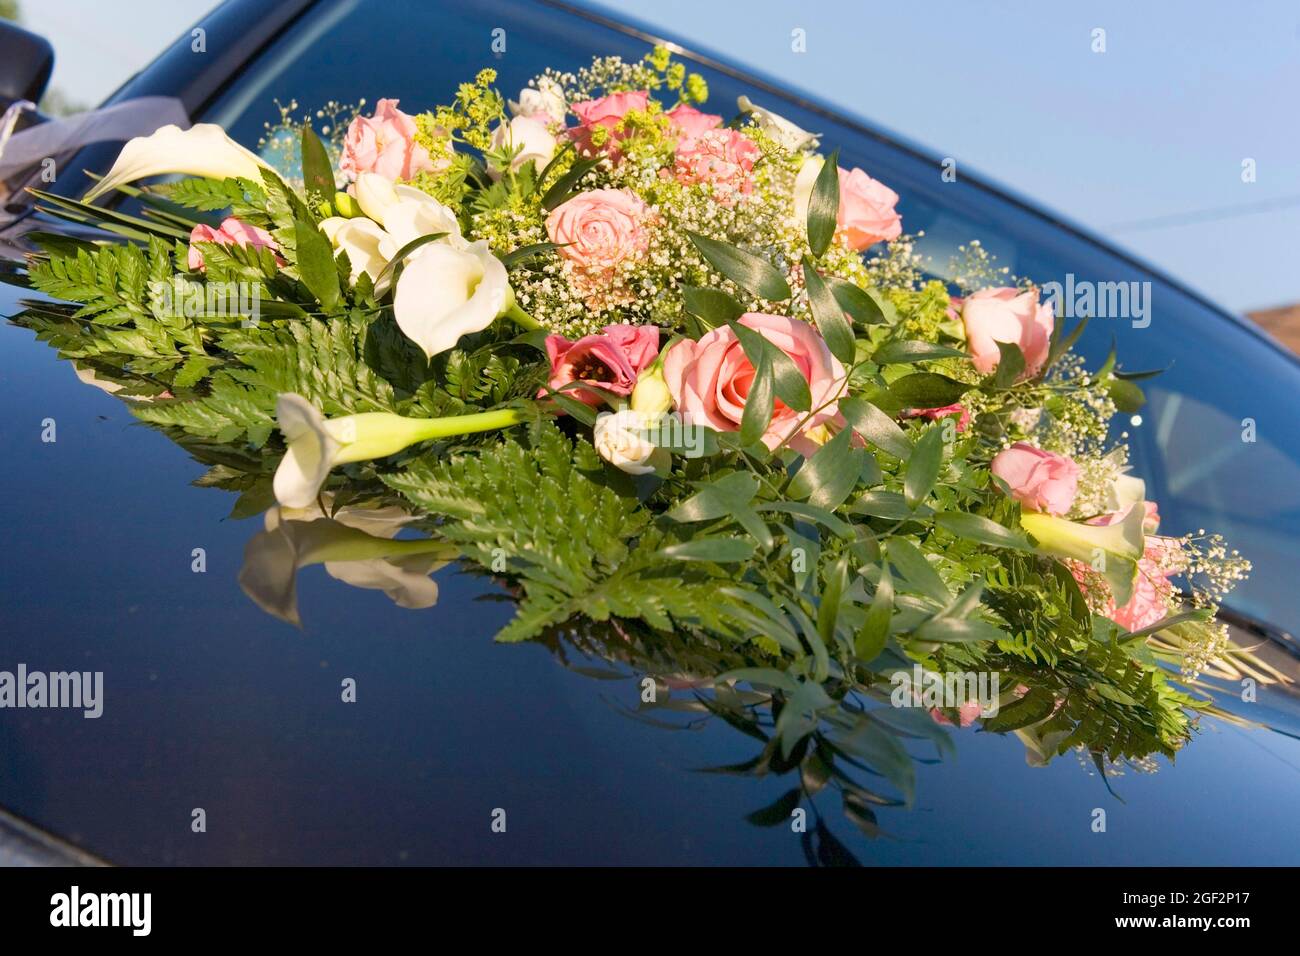 flower bouquet on a car of a married couple, Austria Stock Photo